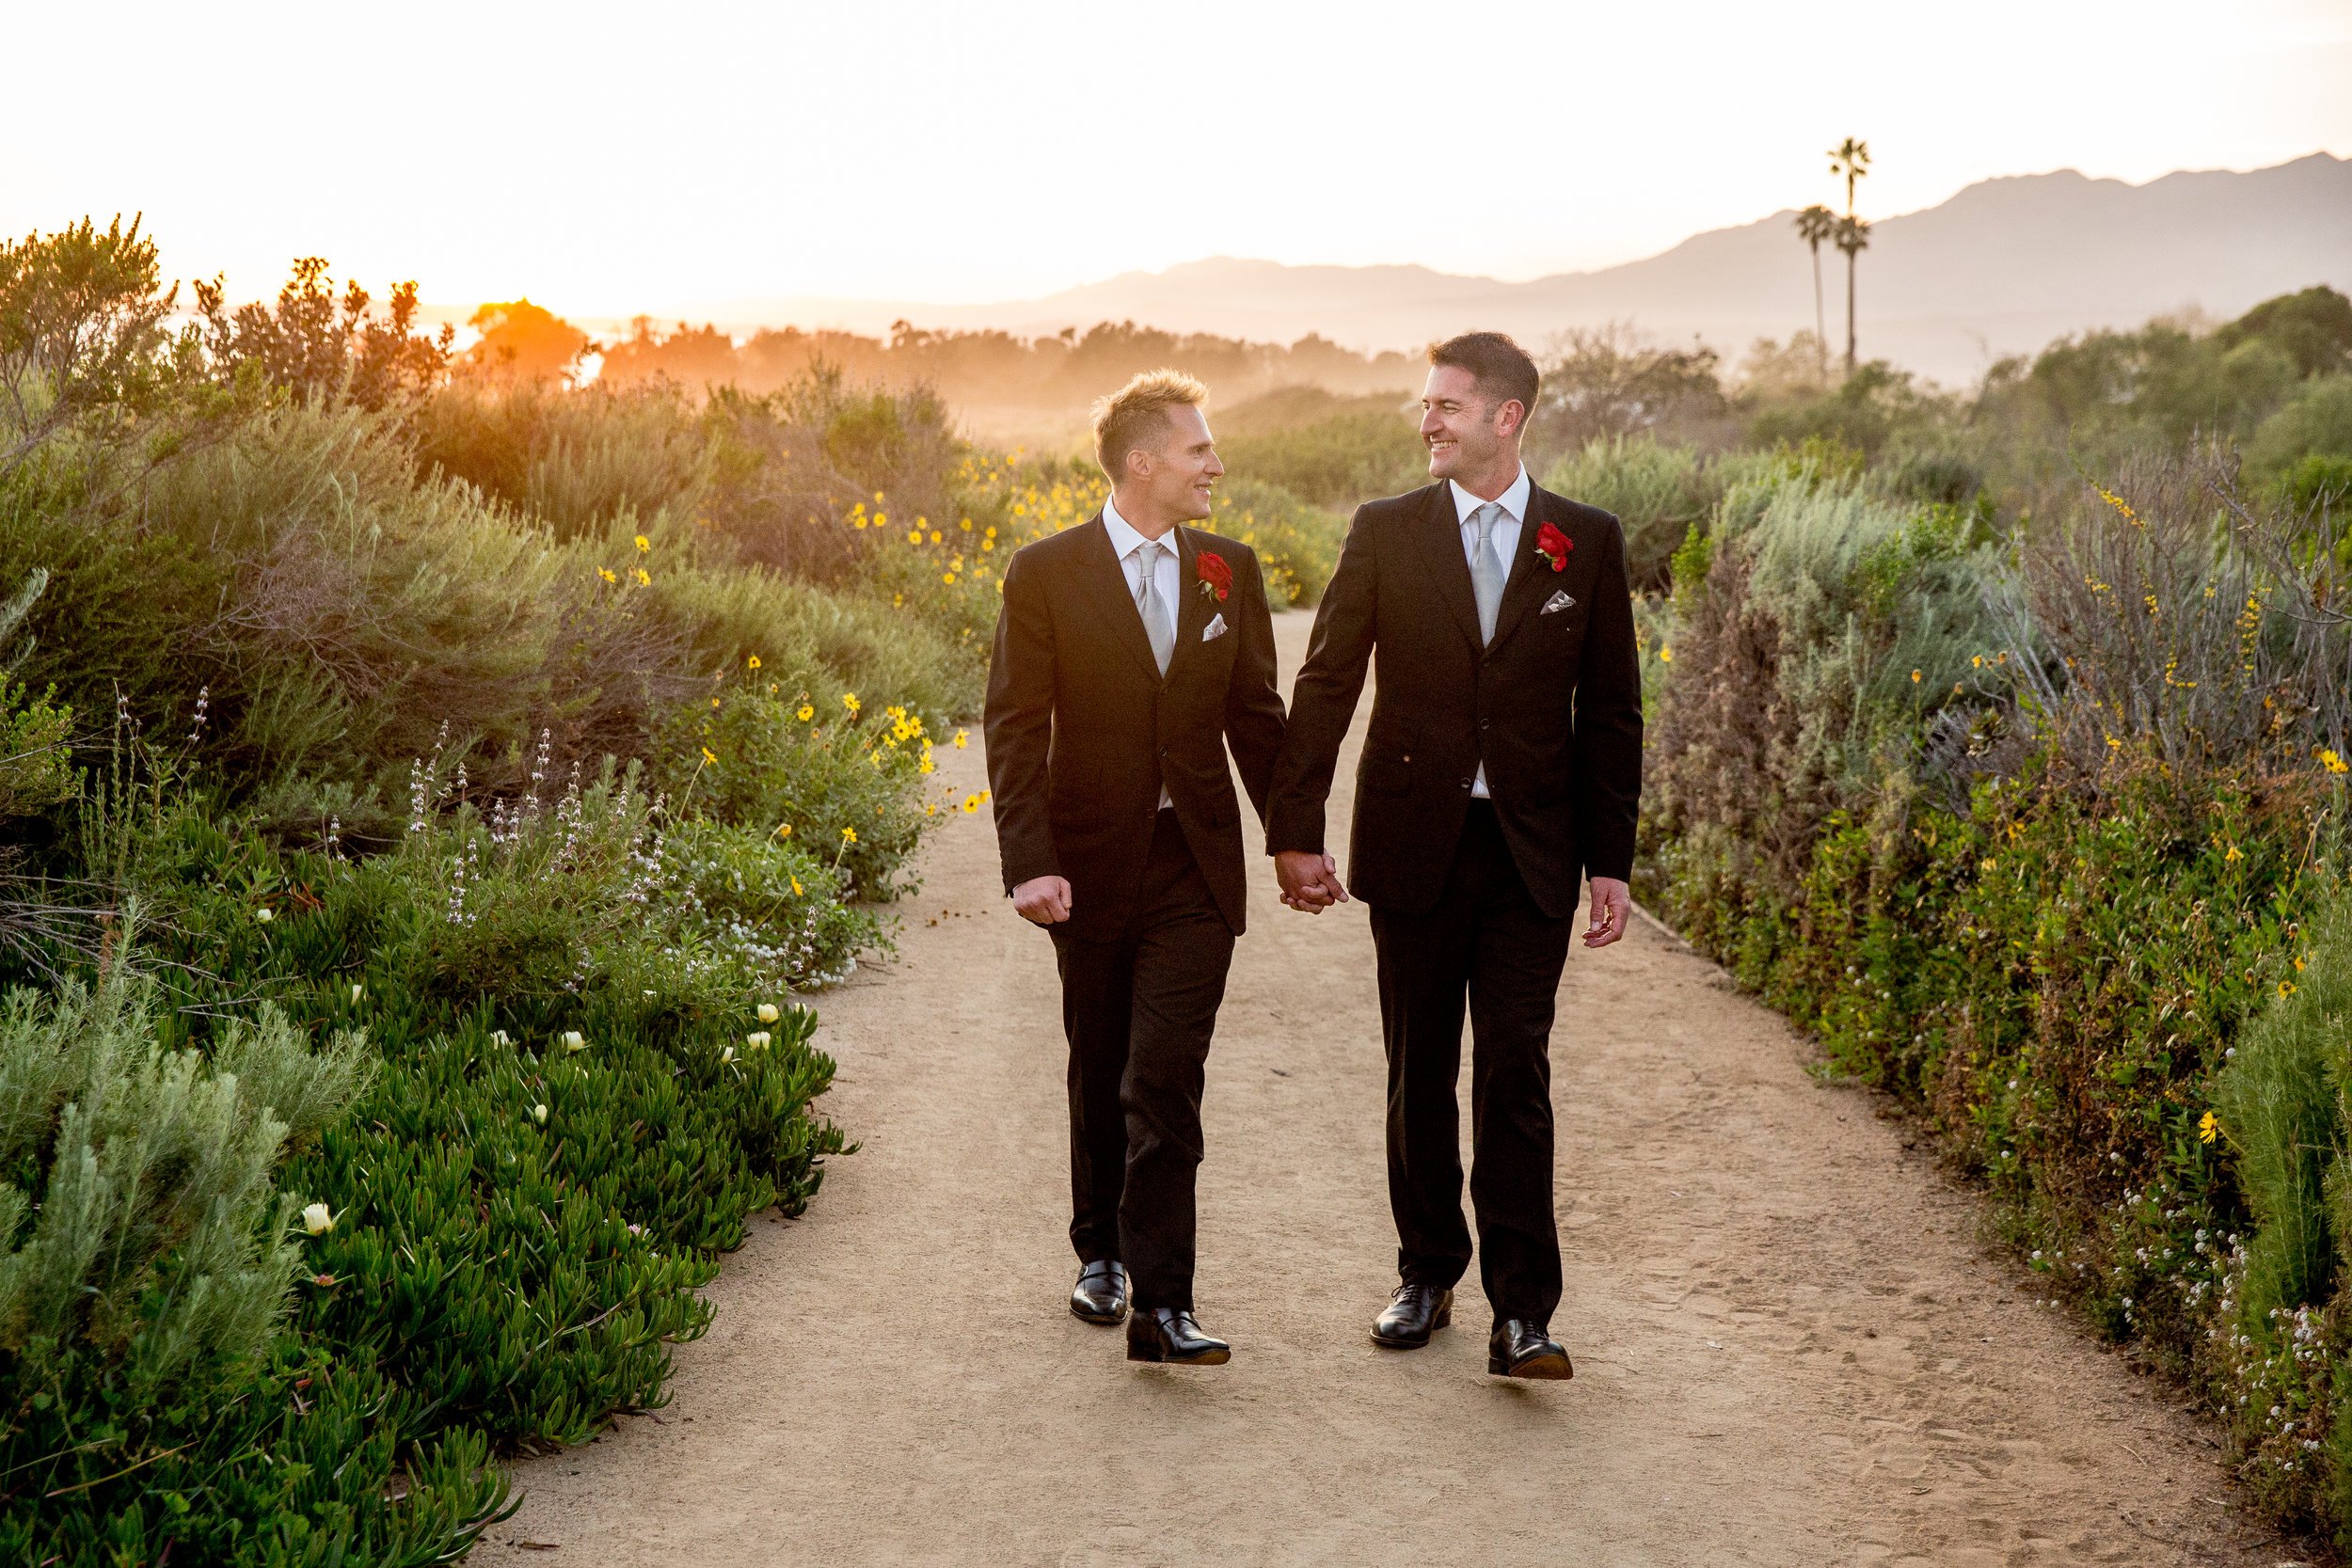 www.santabarbarawedding.com | Head and Heart Photography | Ocean Front Venue | Felici Events | Passion Flowers | Sunset Walk | Gay Wedding